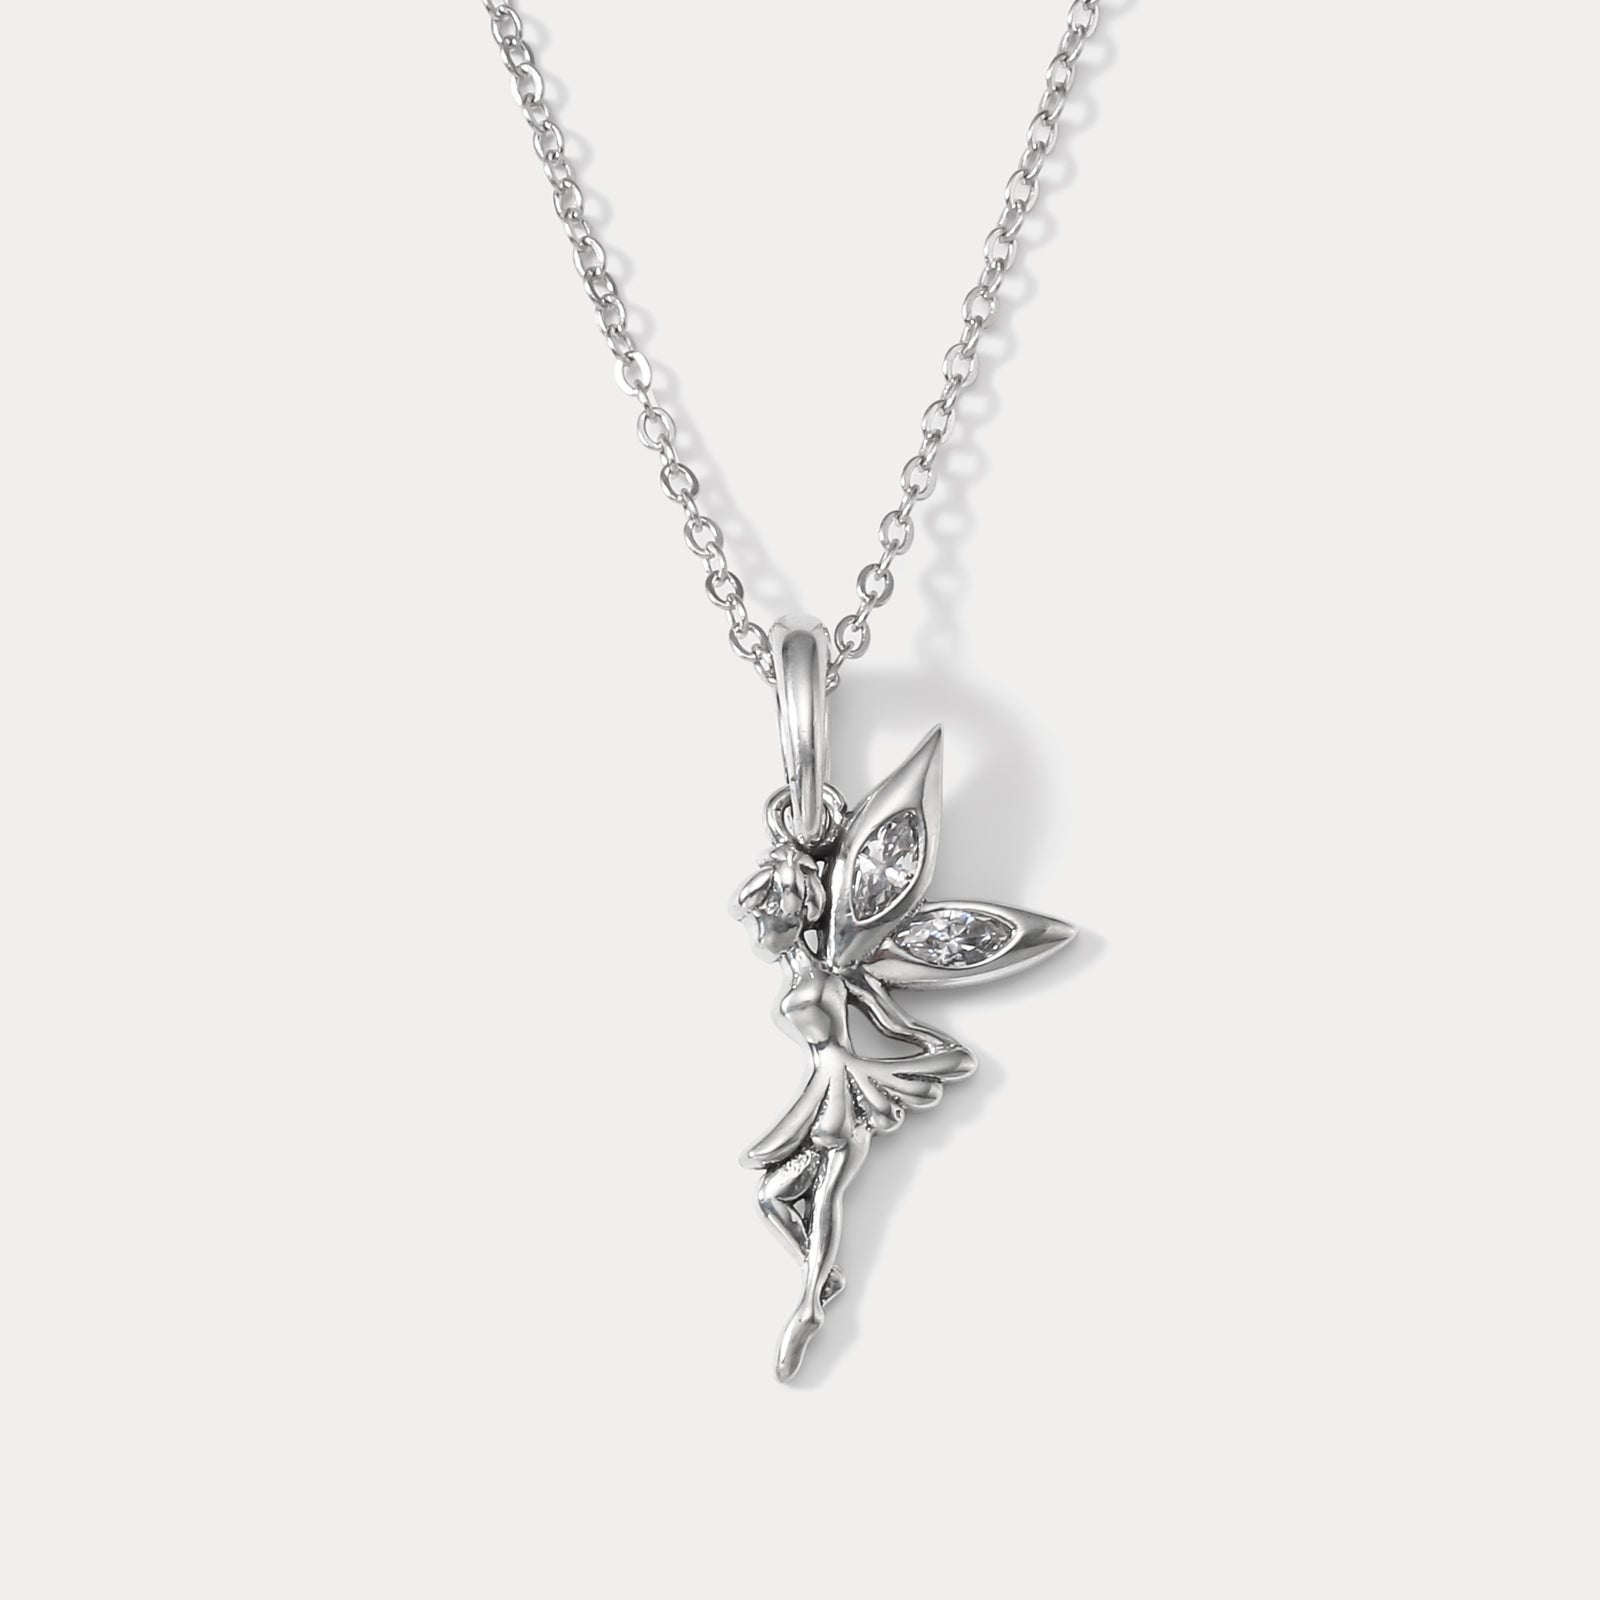 Selenichast Silver Fairy Necklace